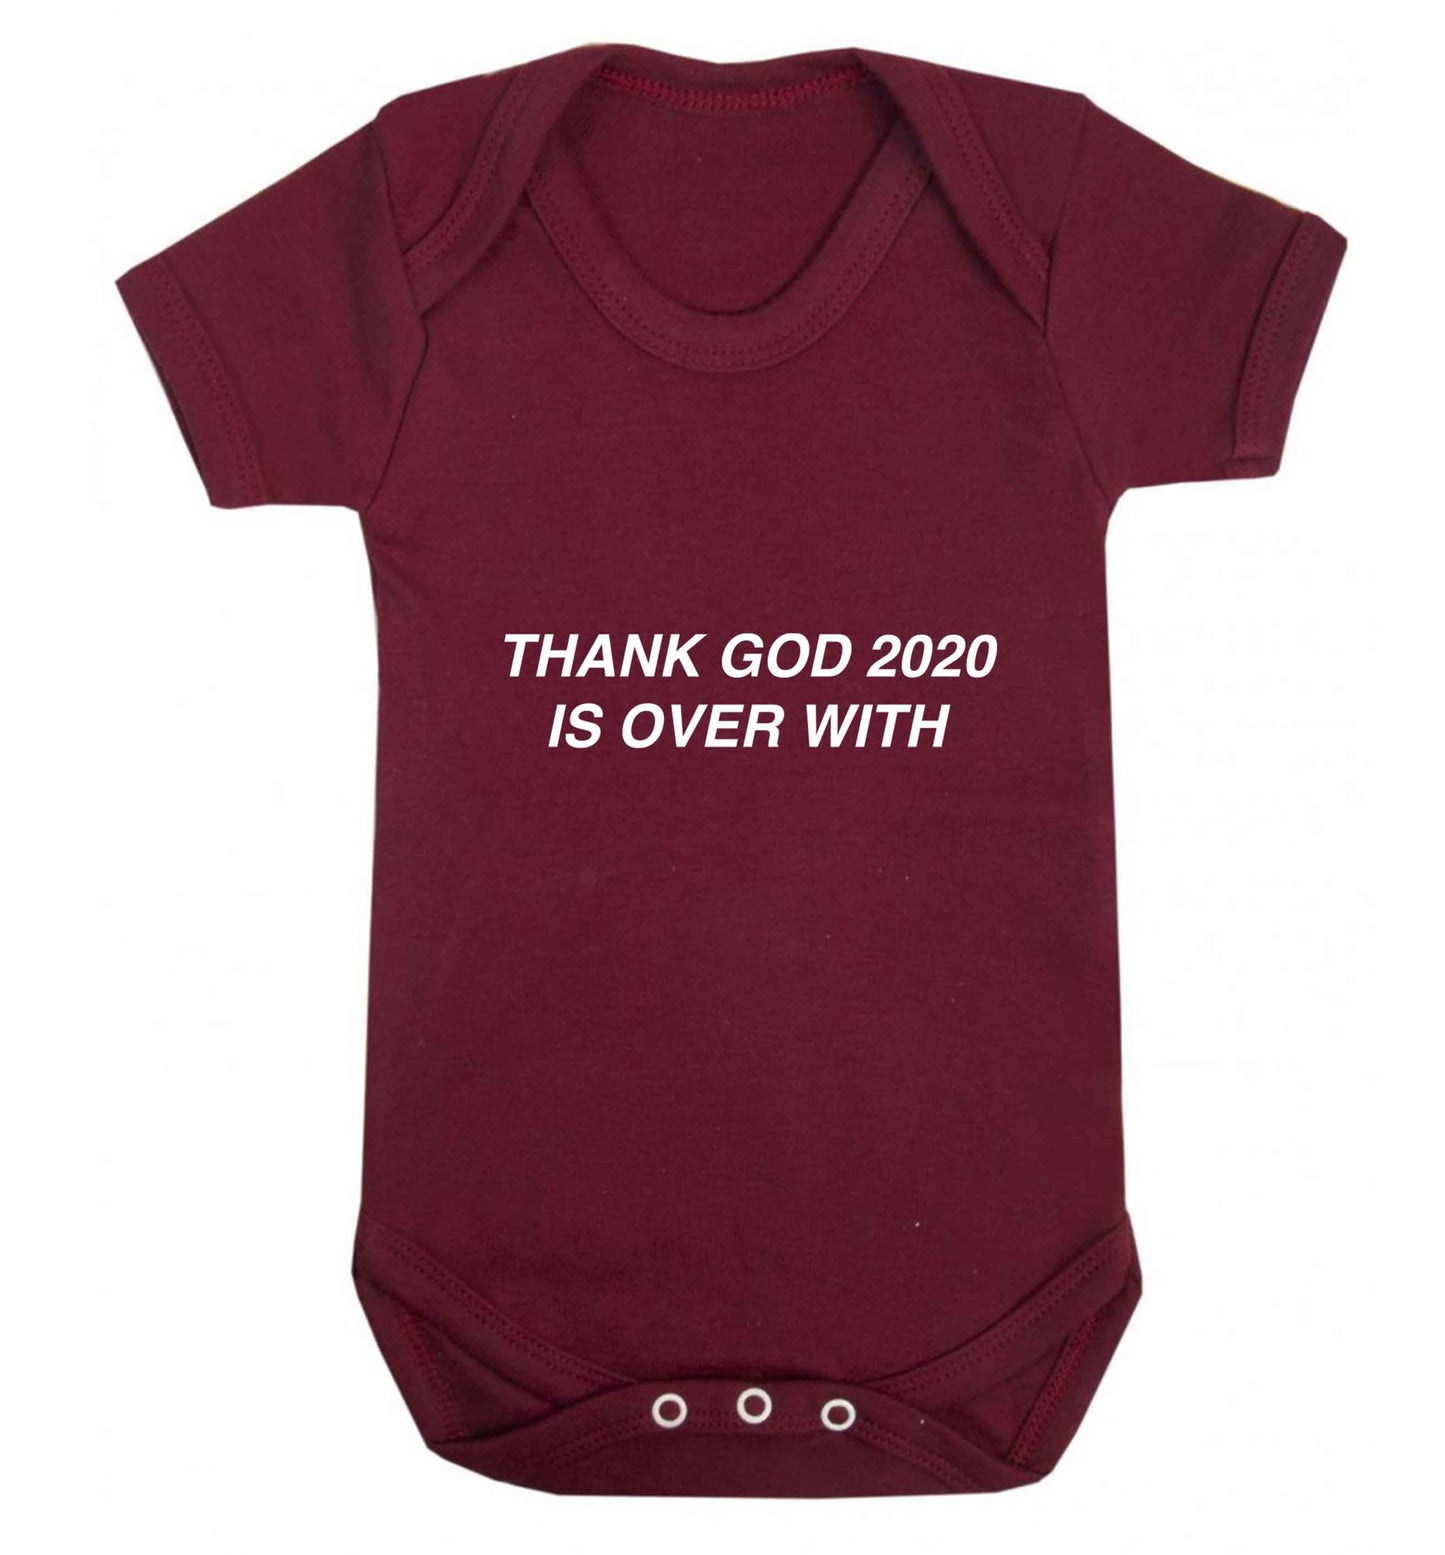 Thank god 2020 is over with baby vest maroon 18-24 months